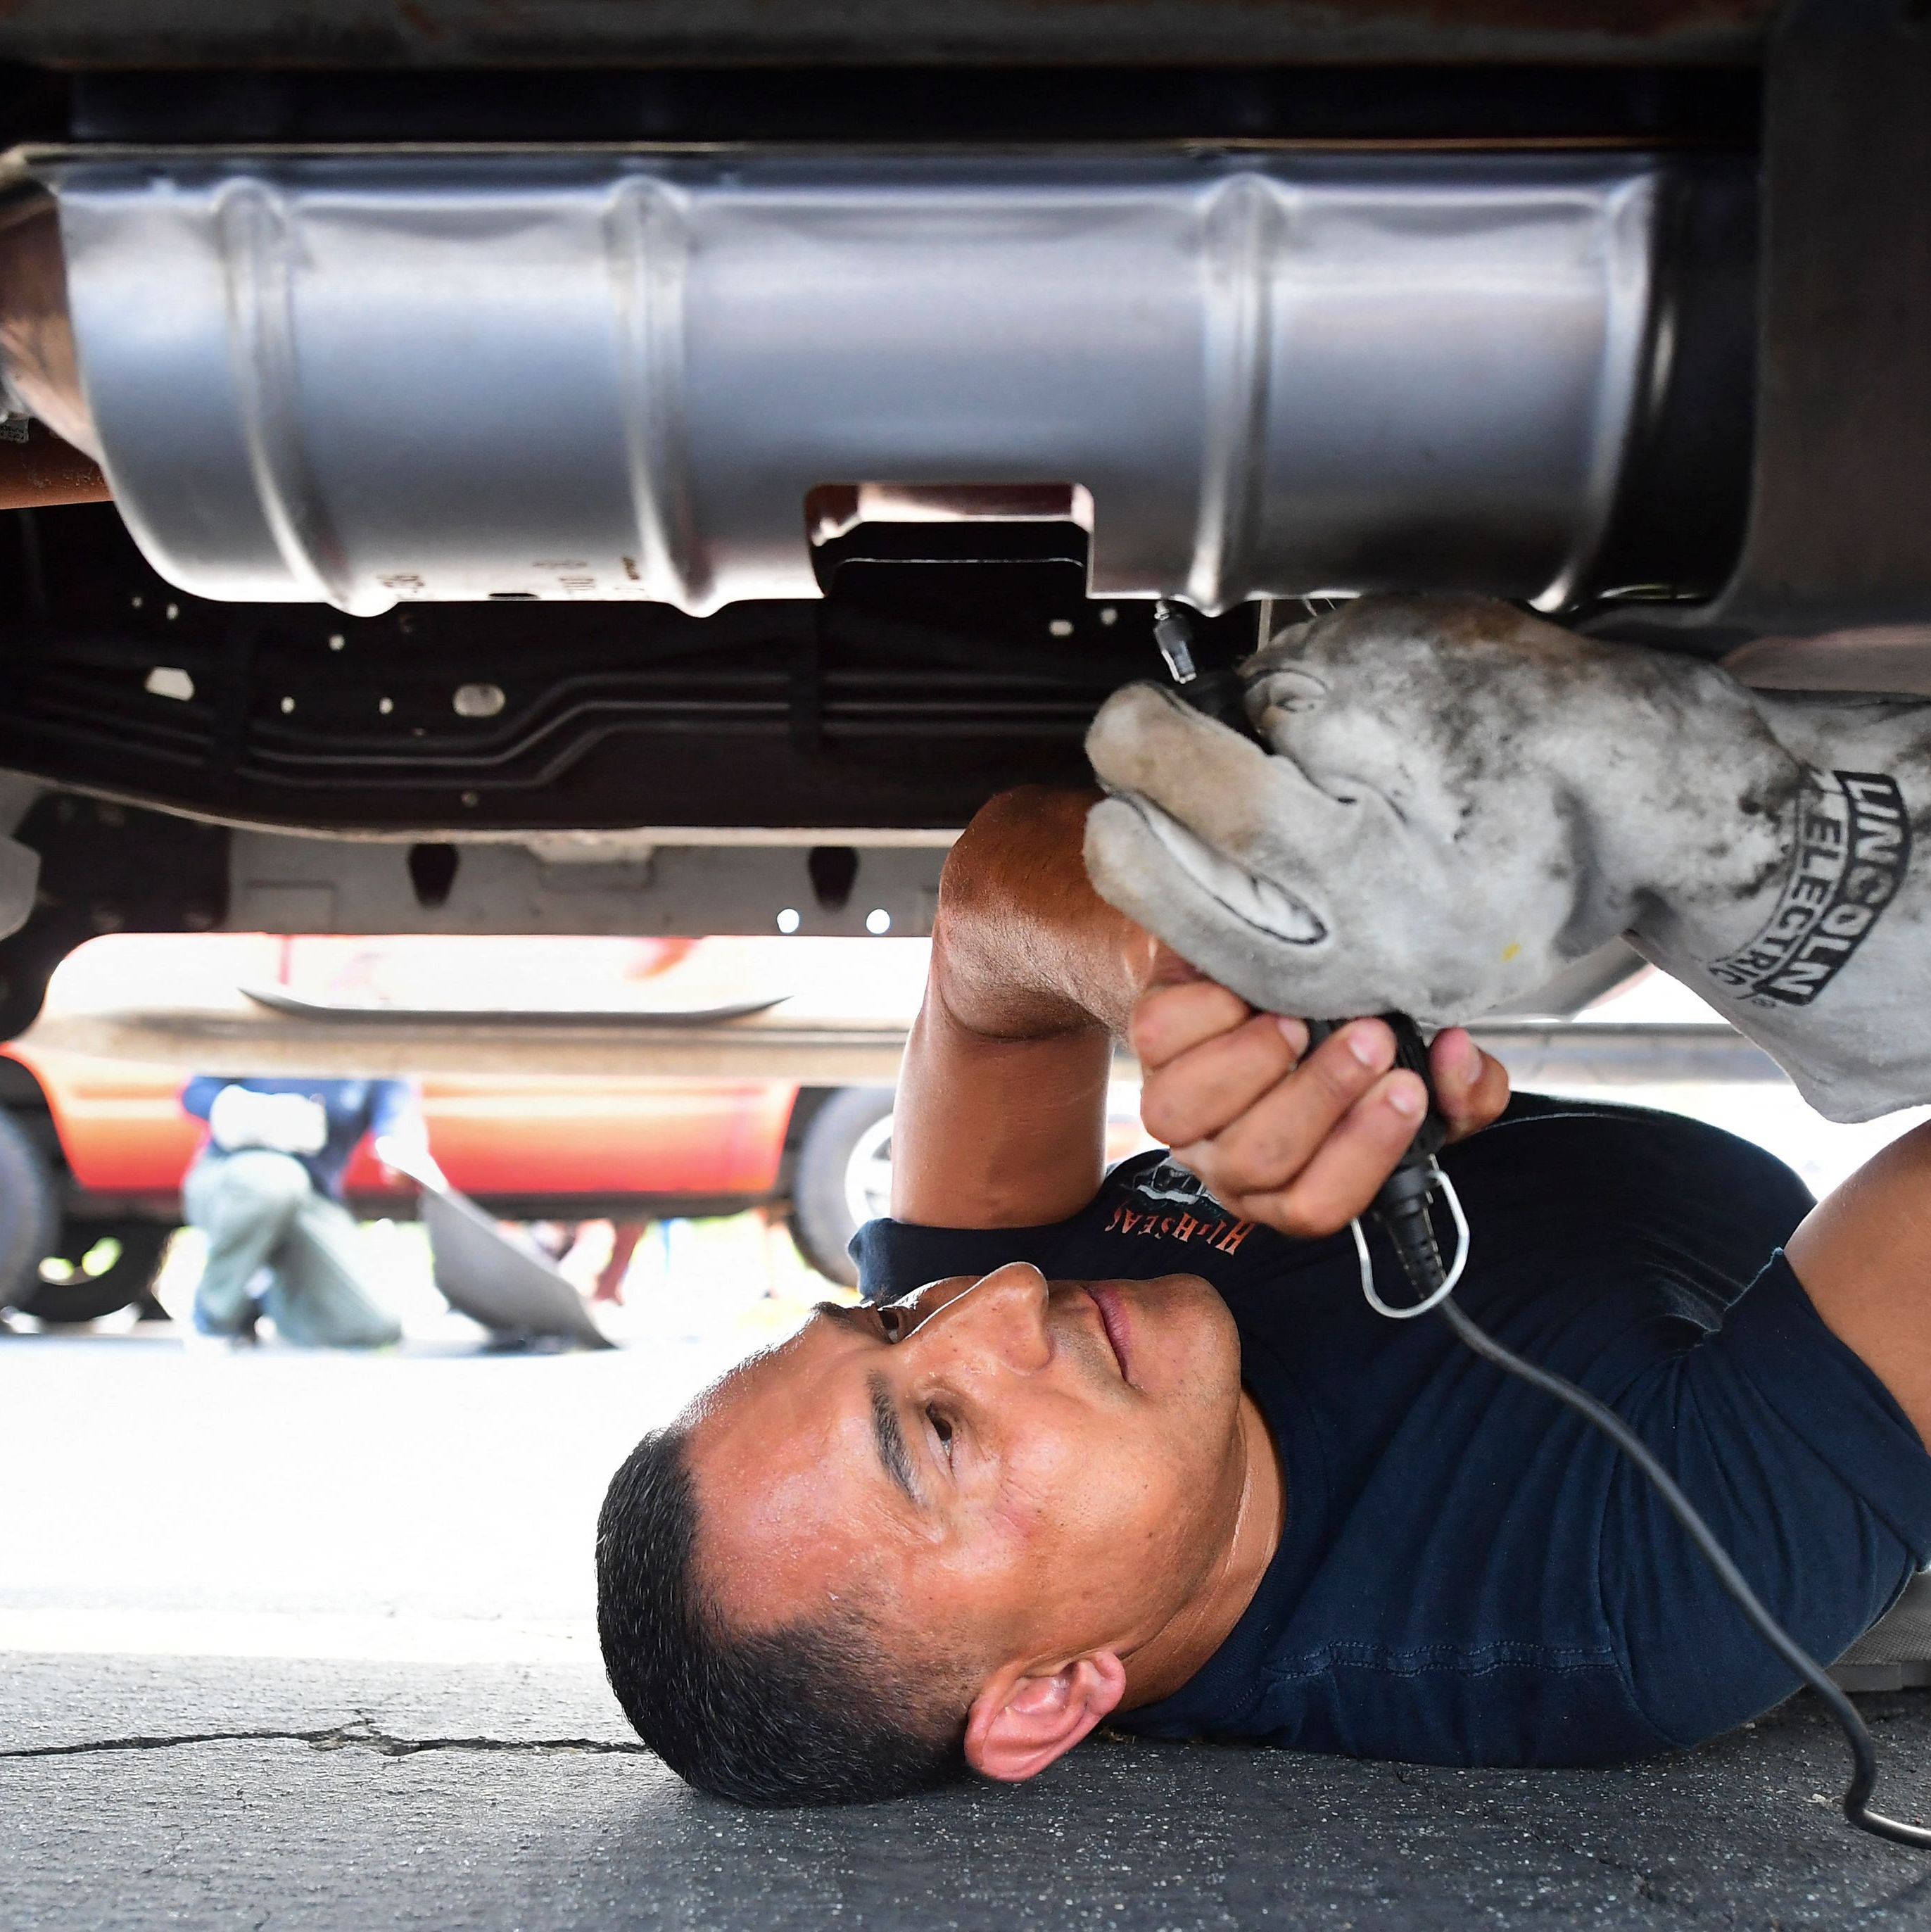 Catalytic Converter Theft: The 10 Vehicles Thieves Target Most Often